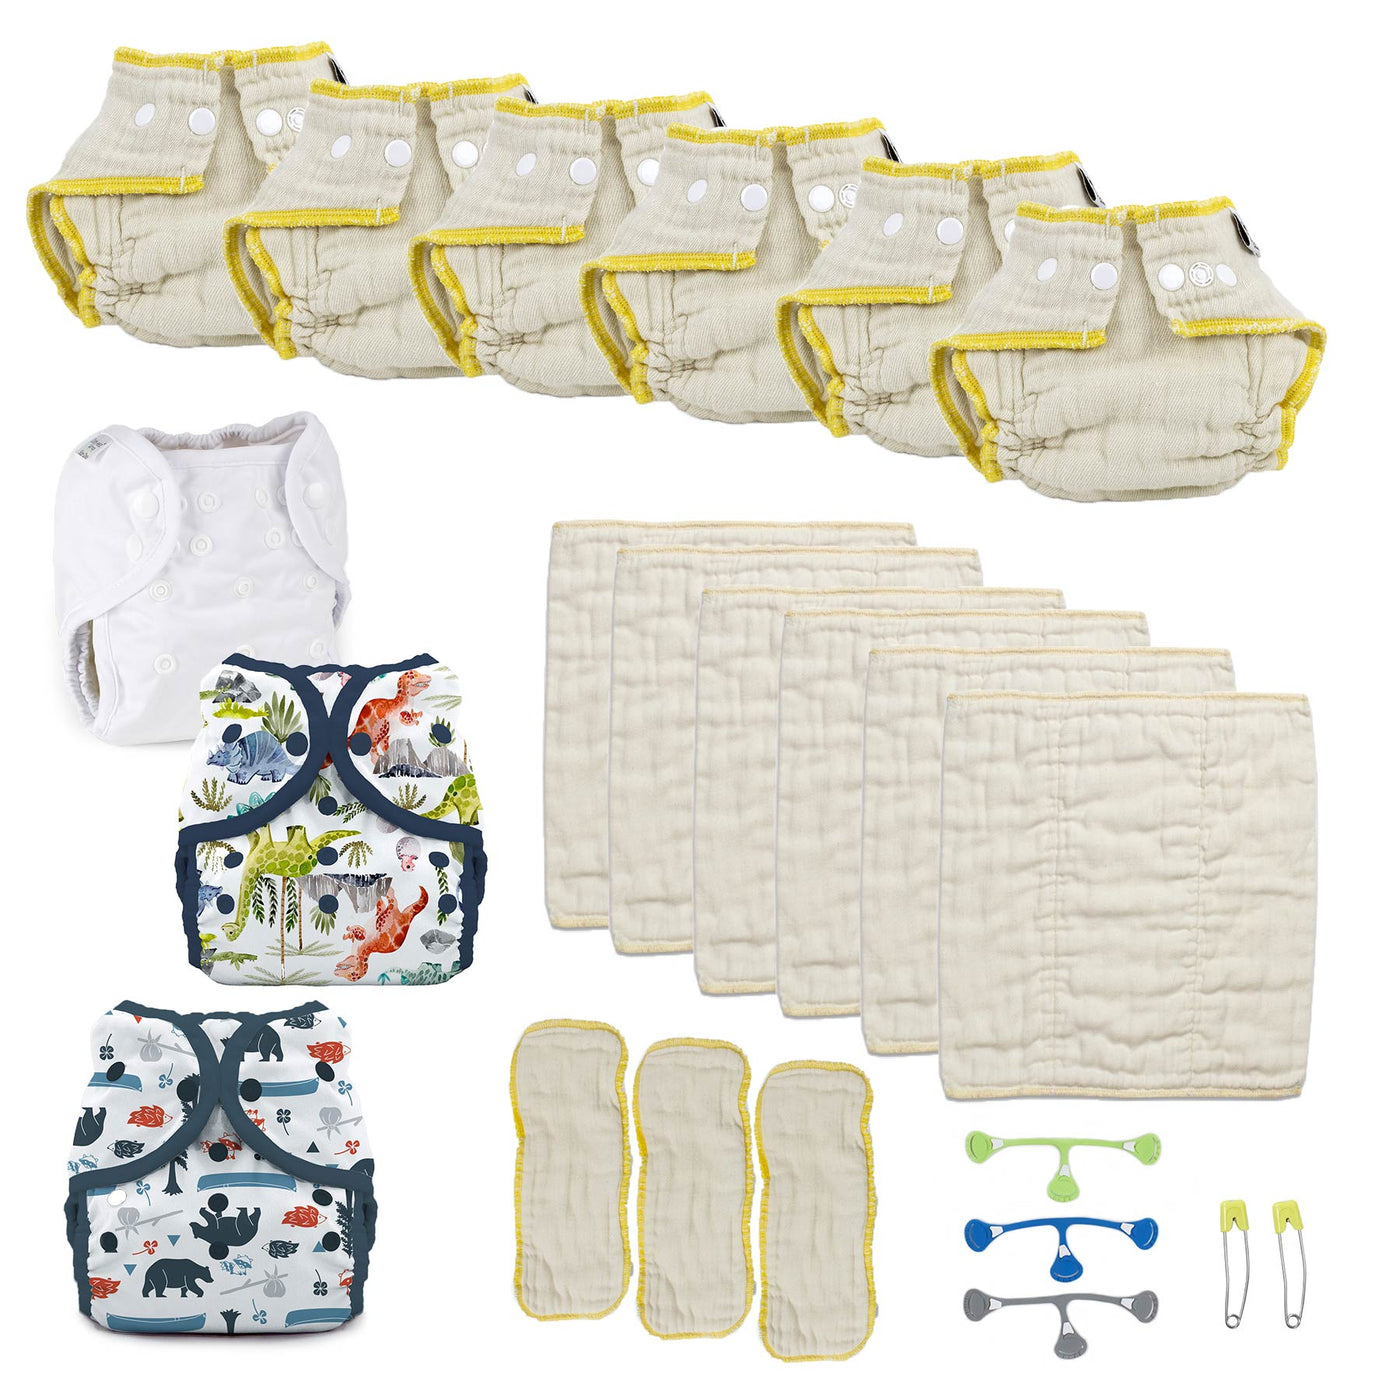 Try both cloth diaper kit size small boy